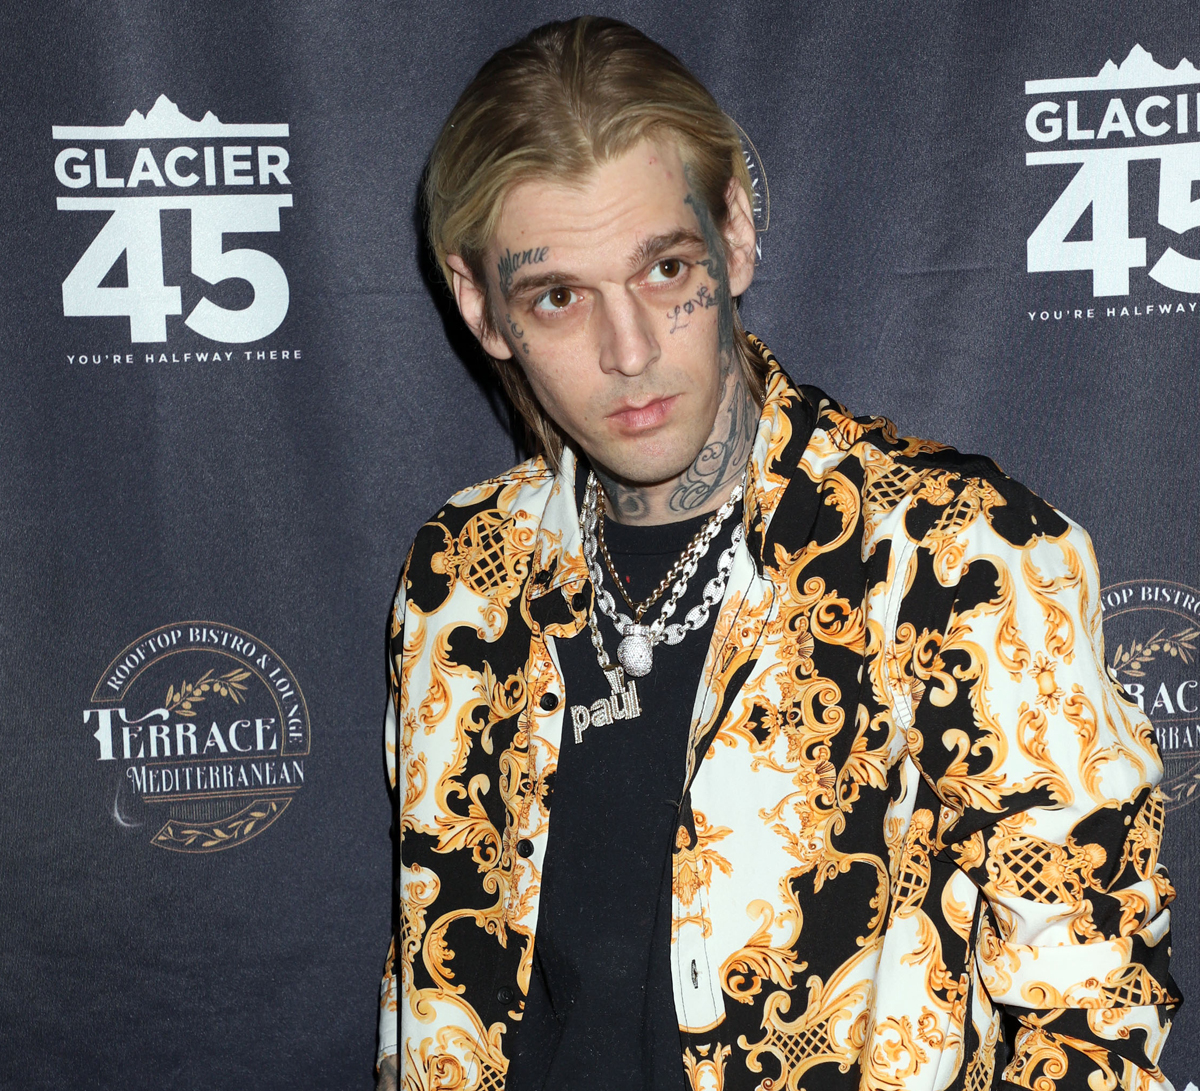 #Aaron Carter Said He Did NOT Want His Memoir To Be Published Before His Death, Publicist Claims!